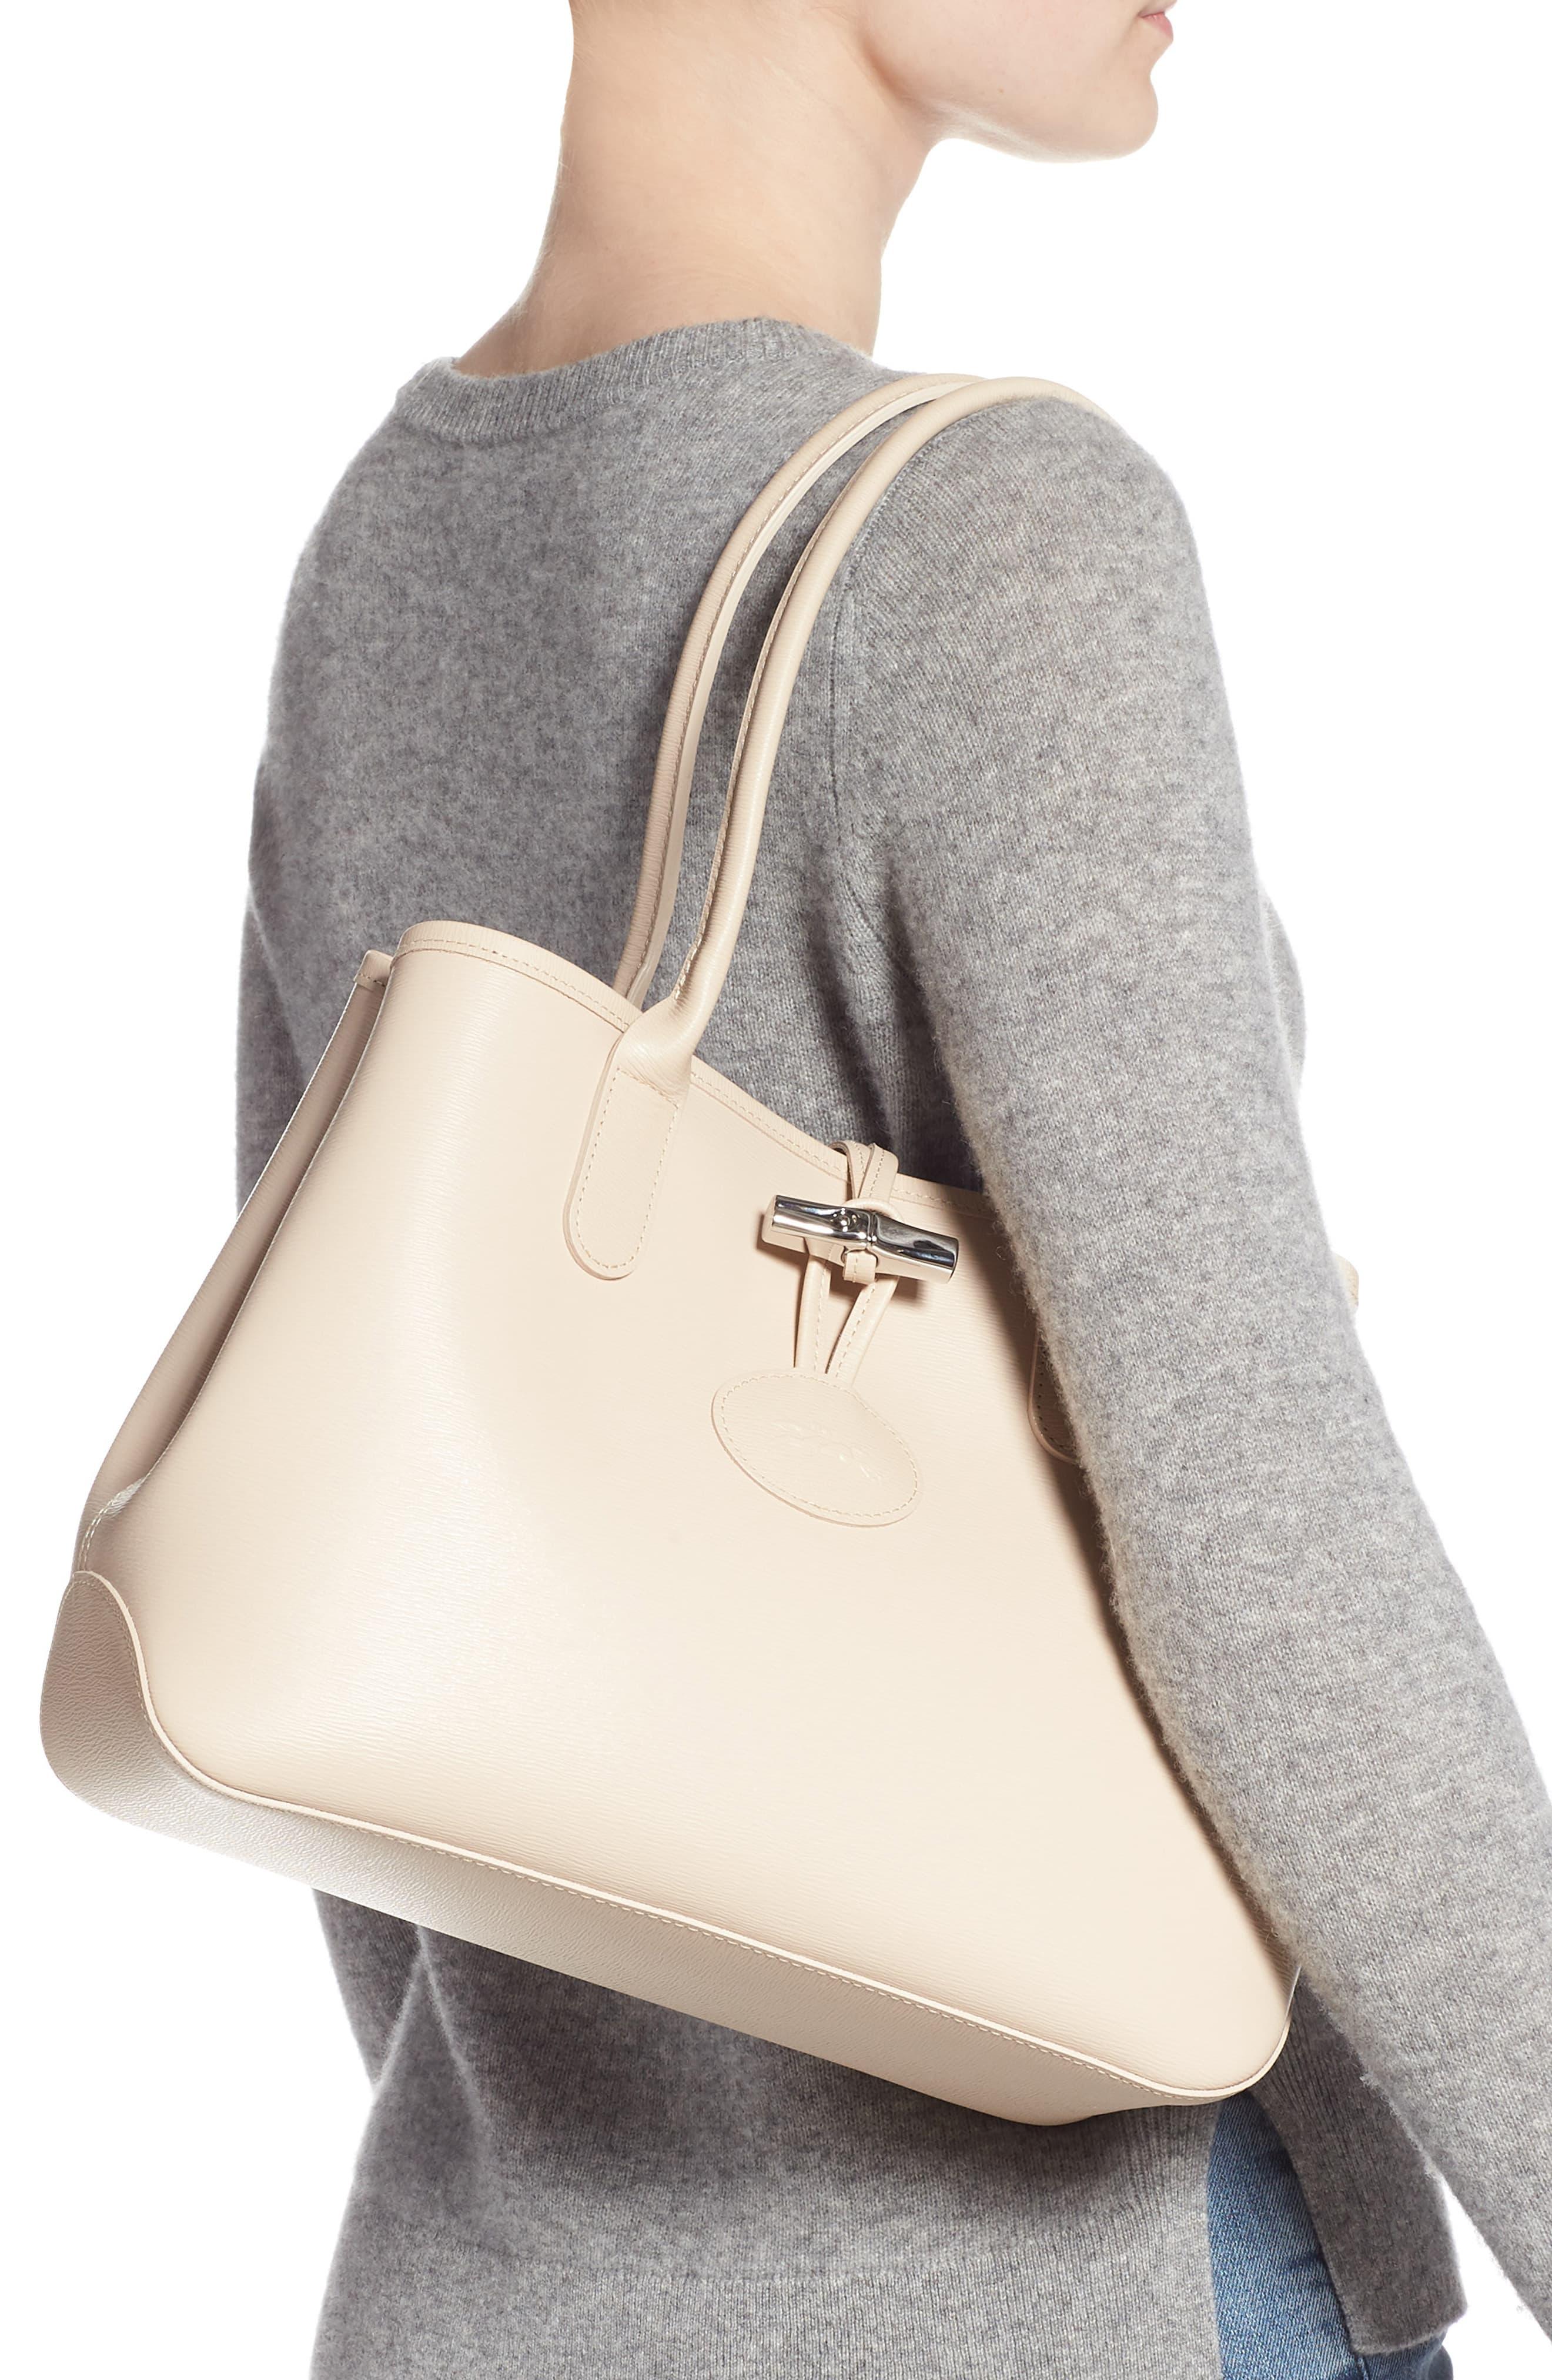 Longchamp Roseau Leather Tote in Ivory 